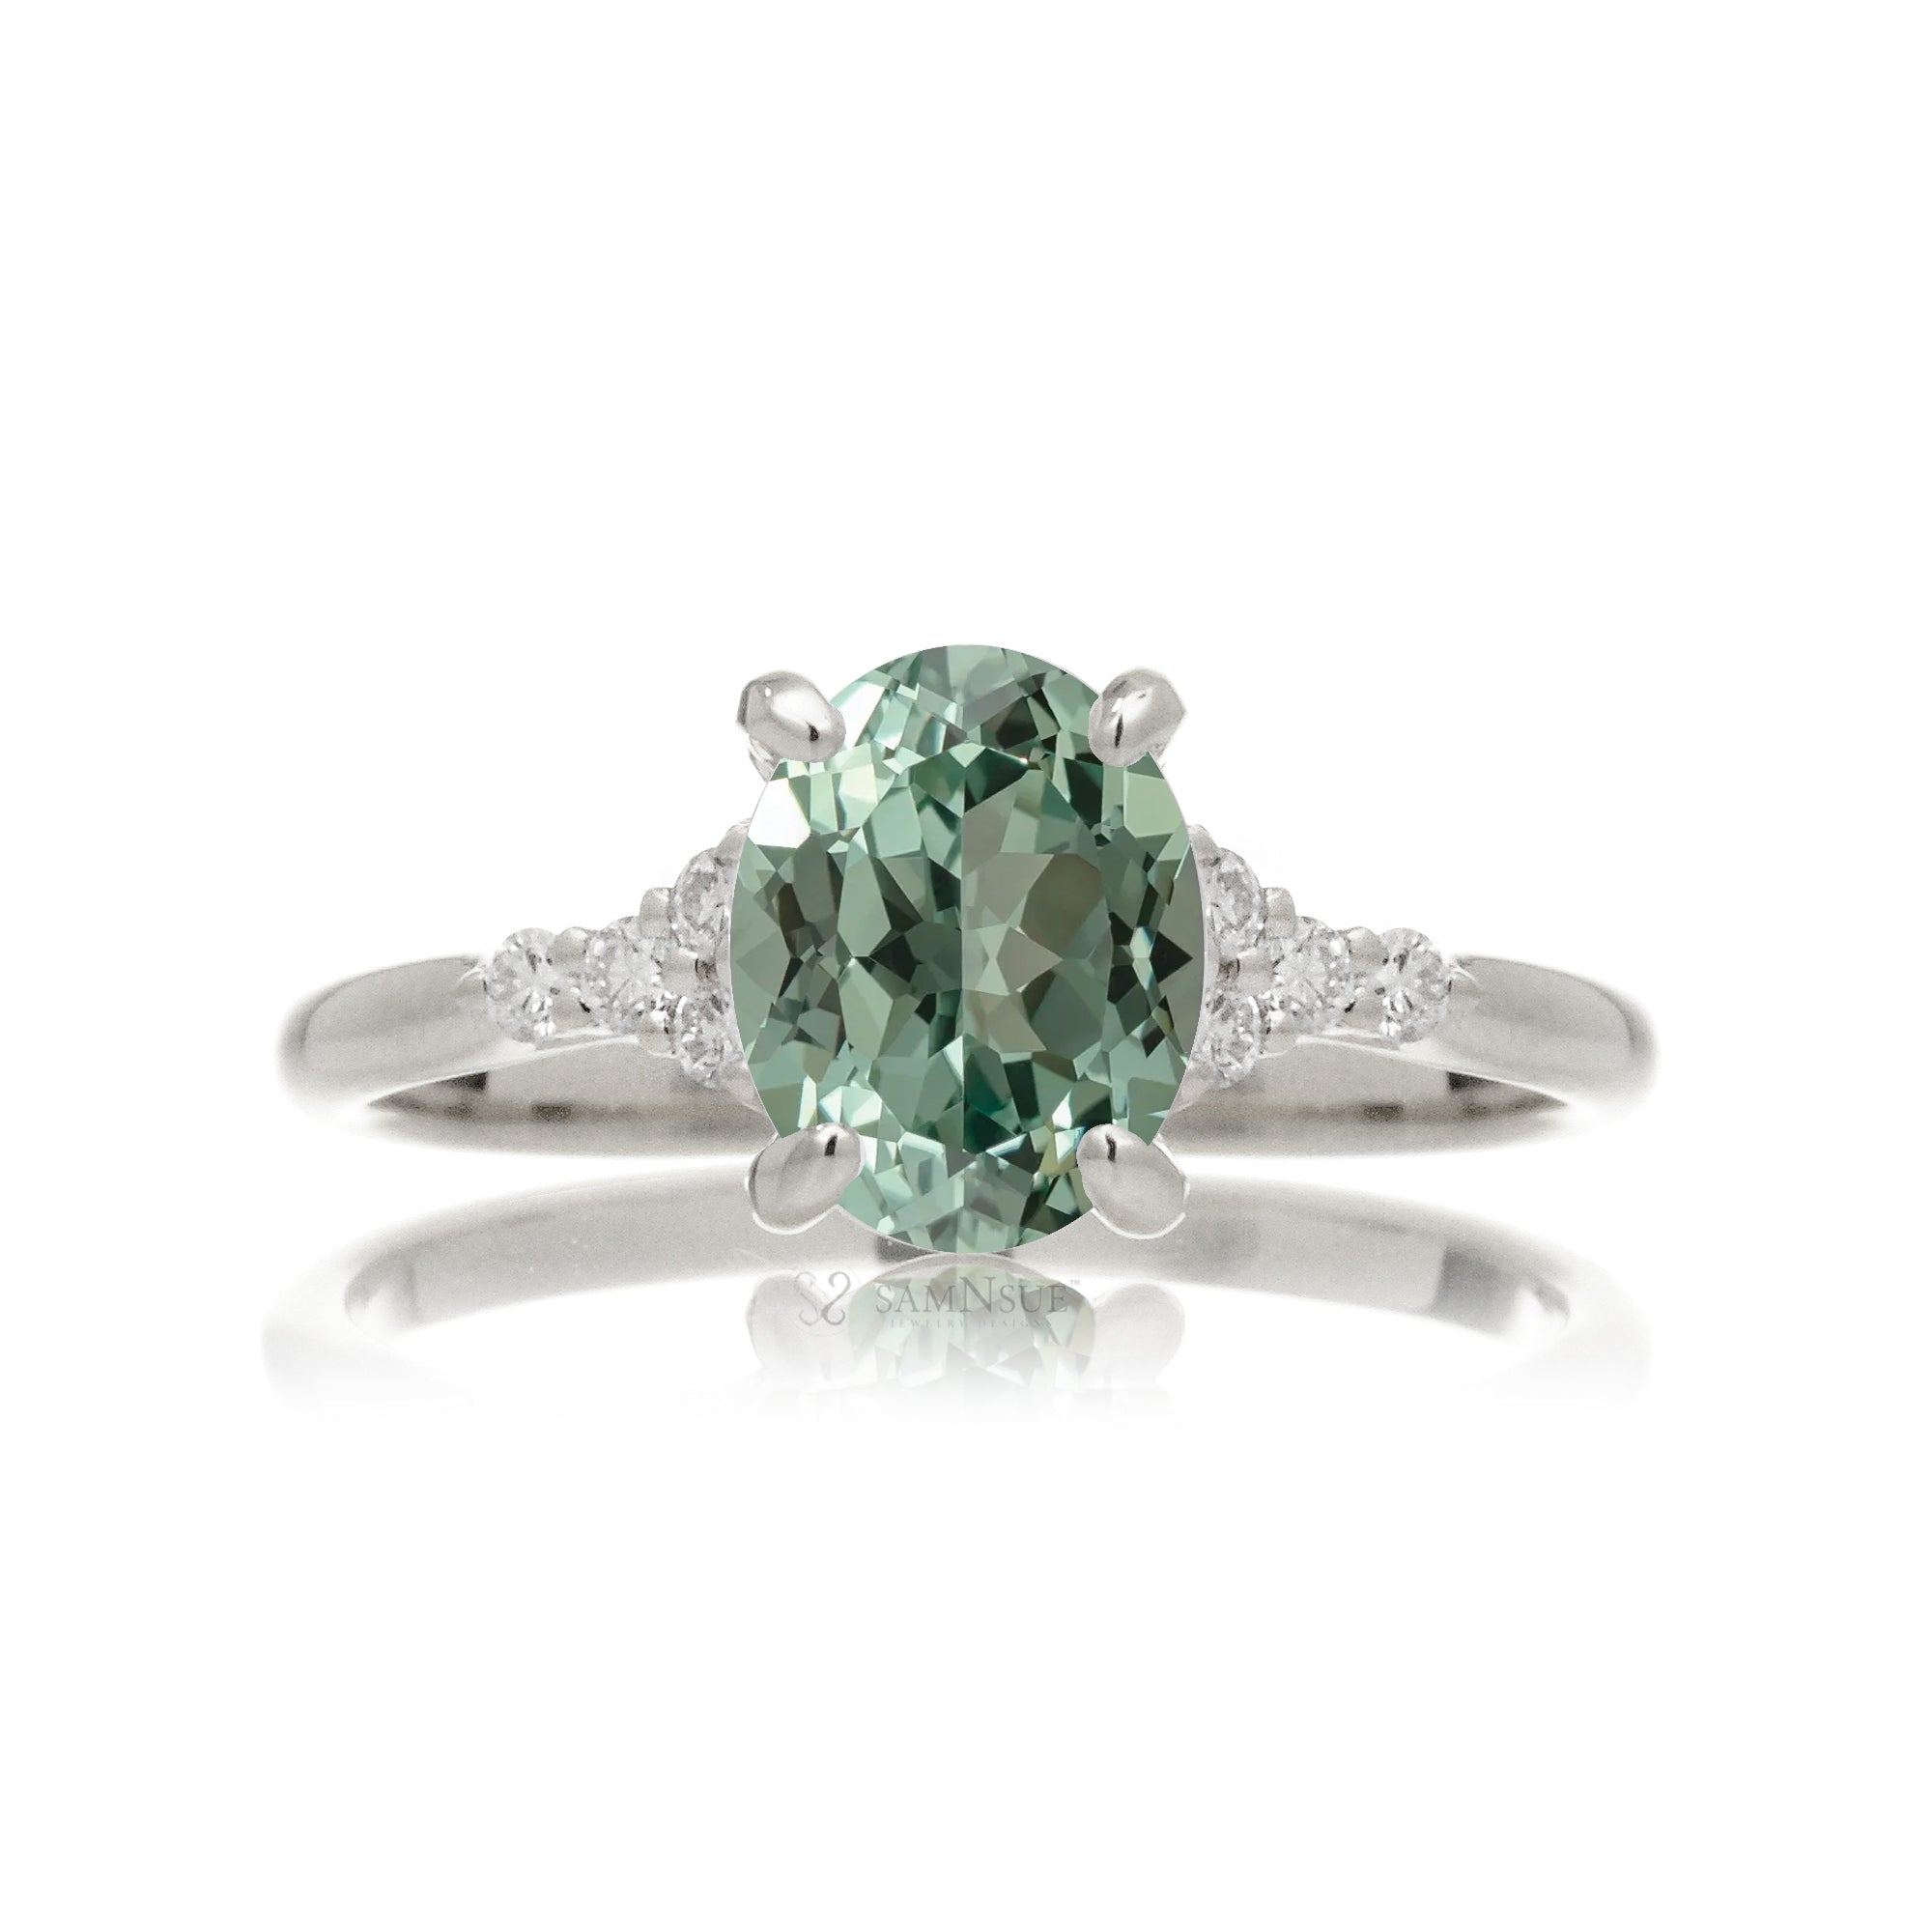 Oval green sapphire diamond ring in white gold with a comfort fit band - the Chloe ring